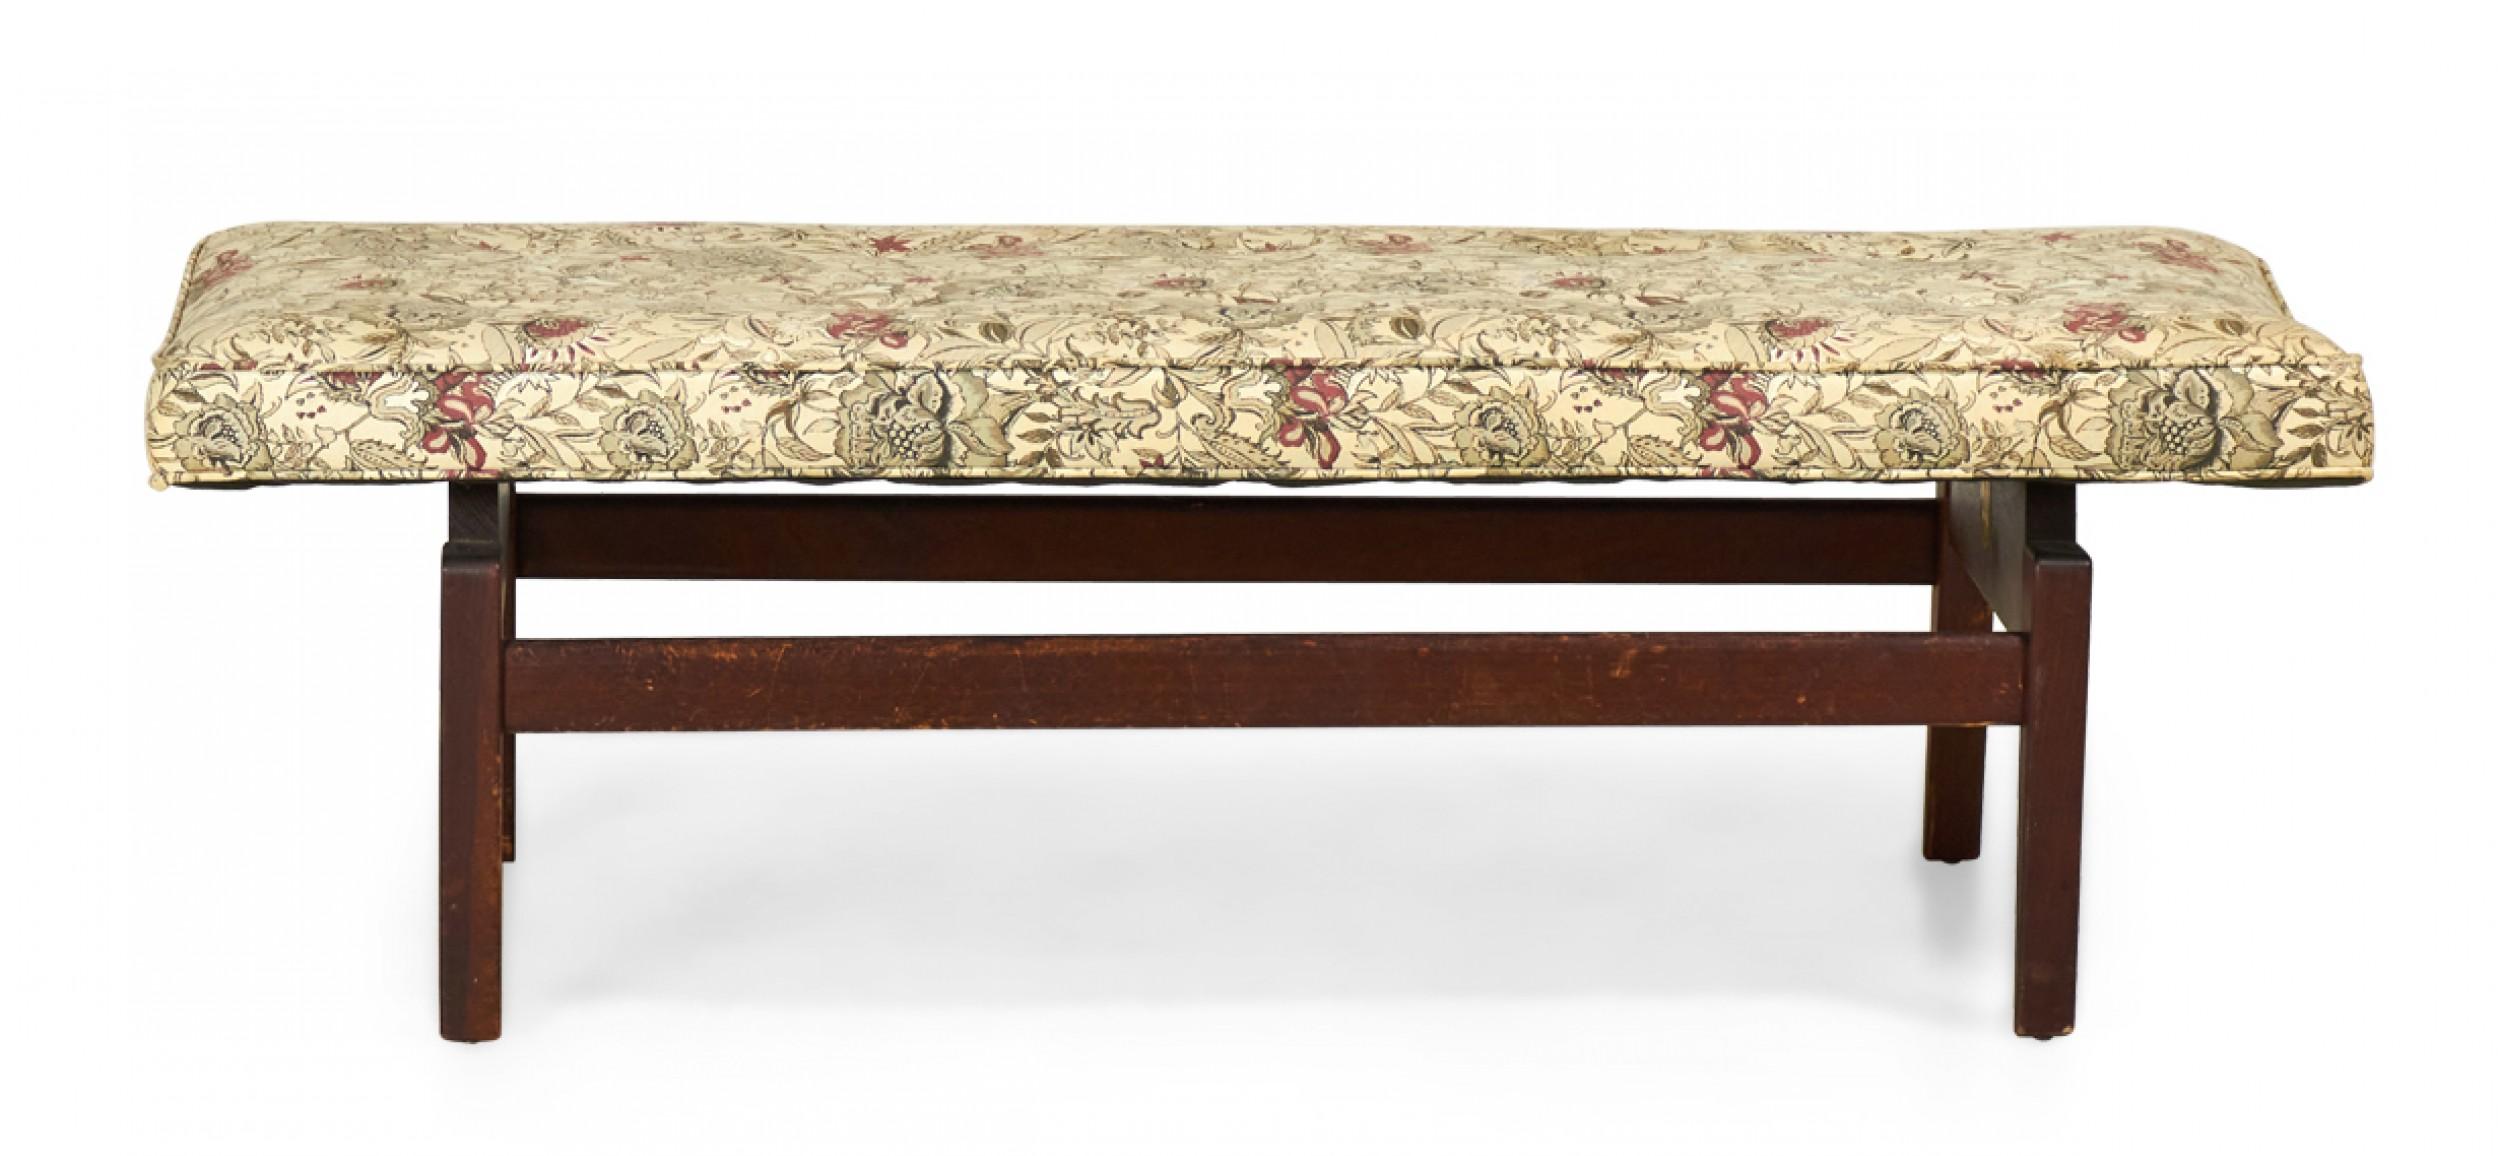 Jens Risom Danish Floating Stained Walnut and Floral Upholstered Bench In Good Condition For Sale In New York, NY